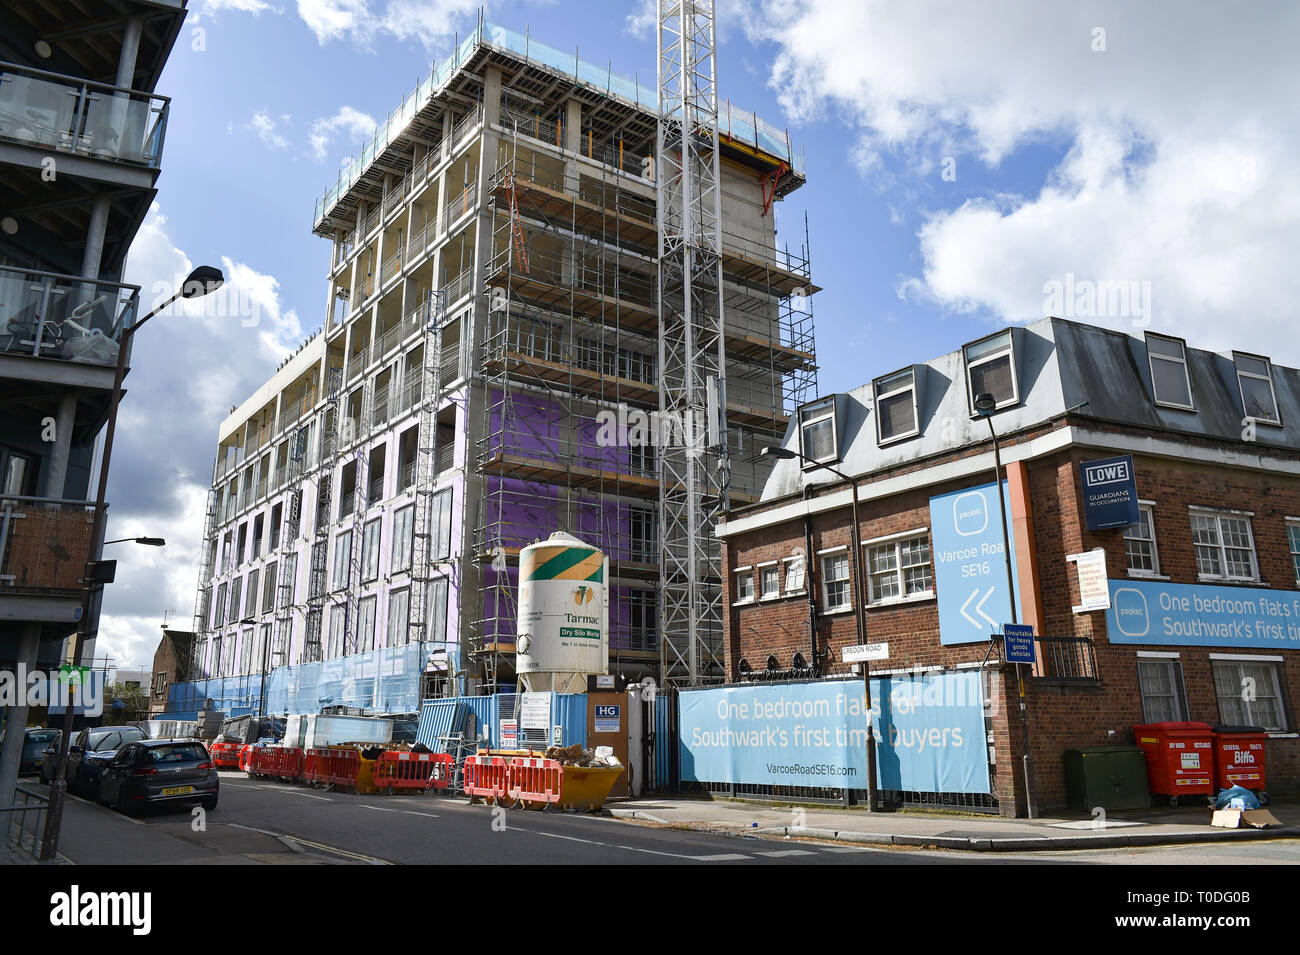 Bermondsey Borough of Southwark London UK - Homes for first time buyers under construction Stock Photo